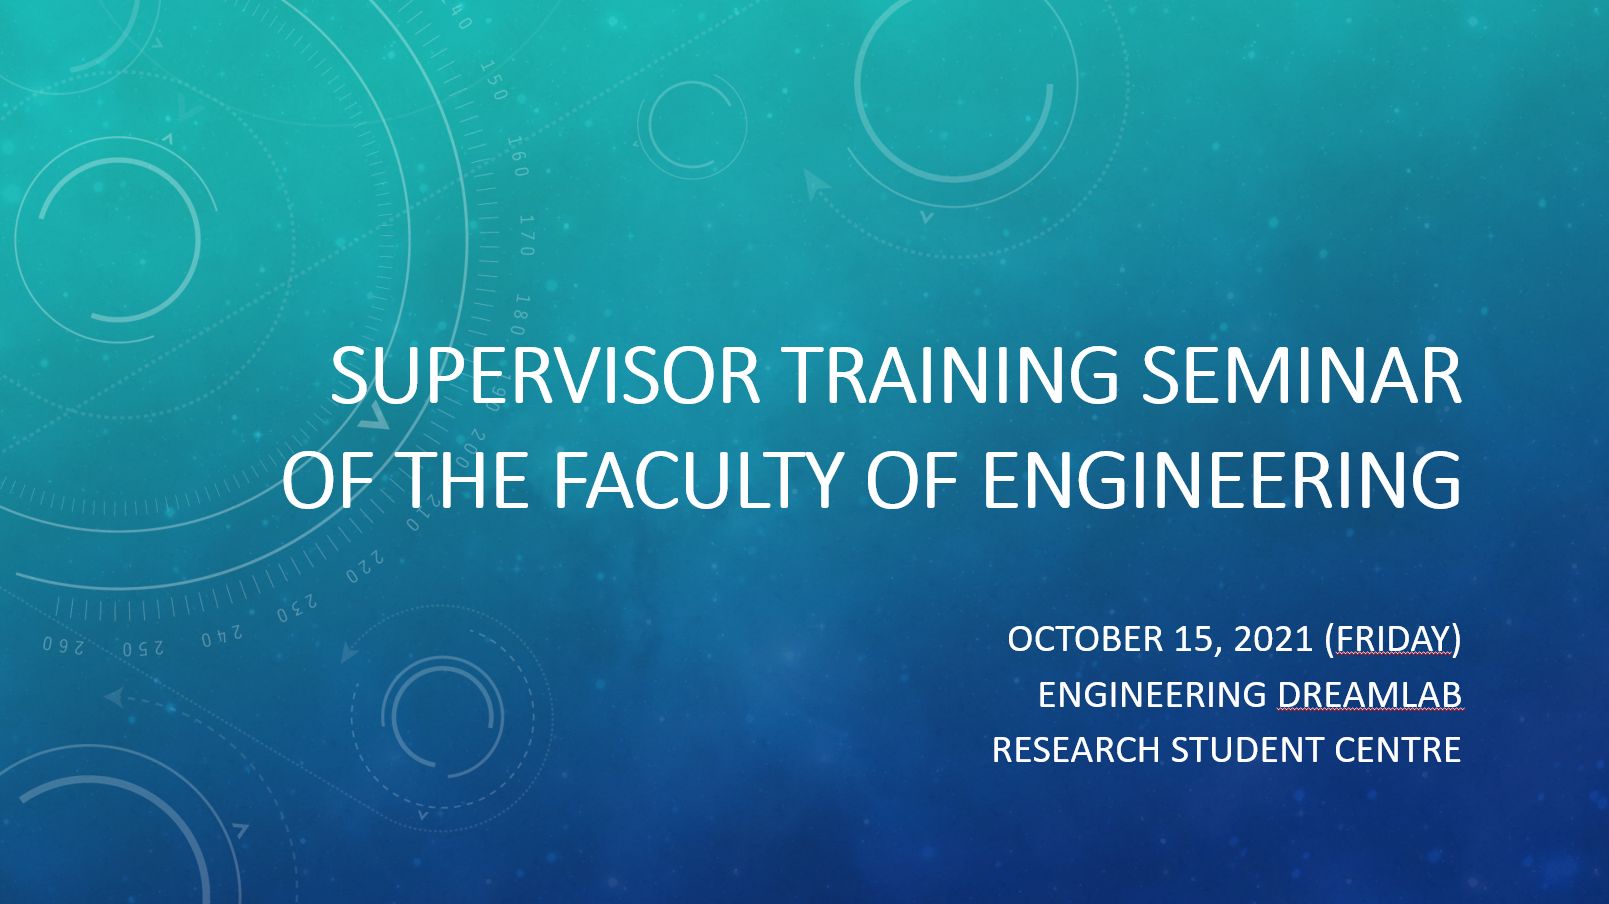 research supervisor training